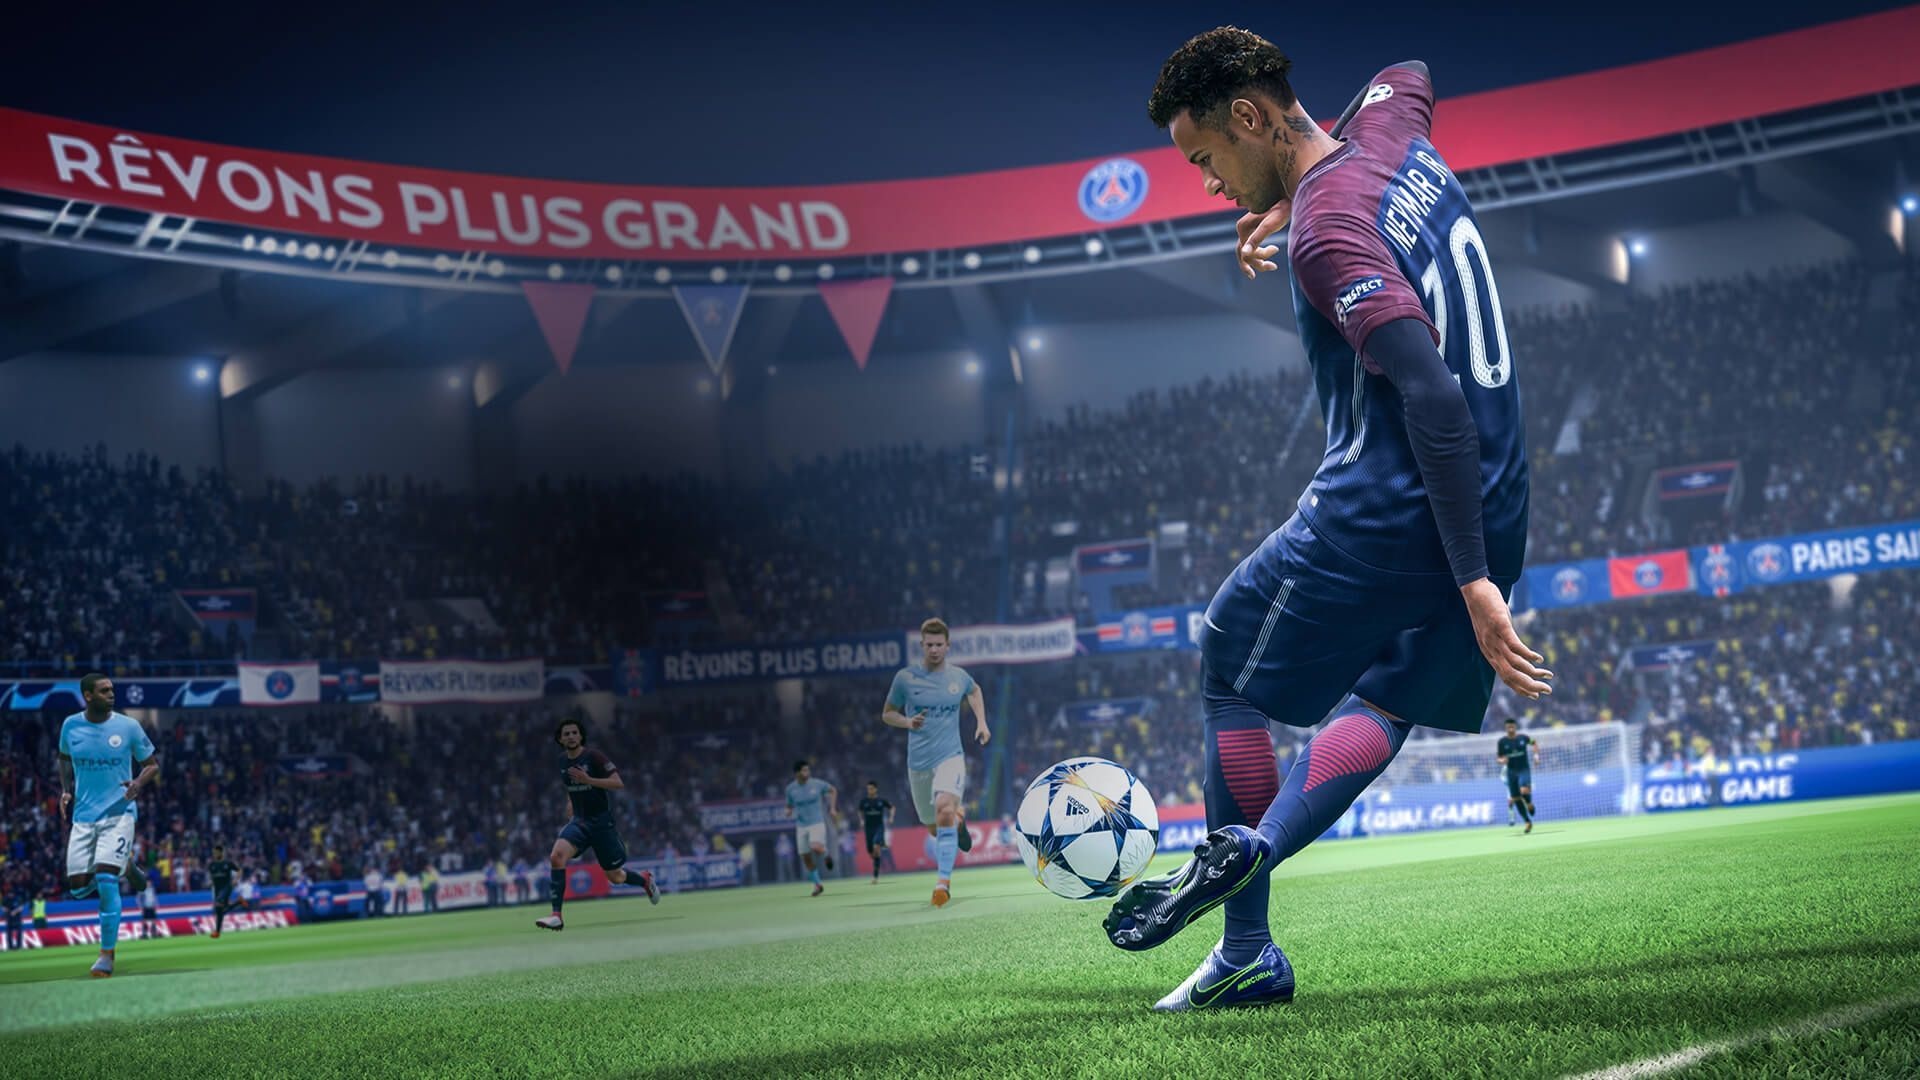 FIFA 19, Striking wallpapers, Ultimate experience, Adrenaline-filled matches, 1920x1080 Full HD Desktop